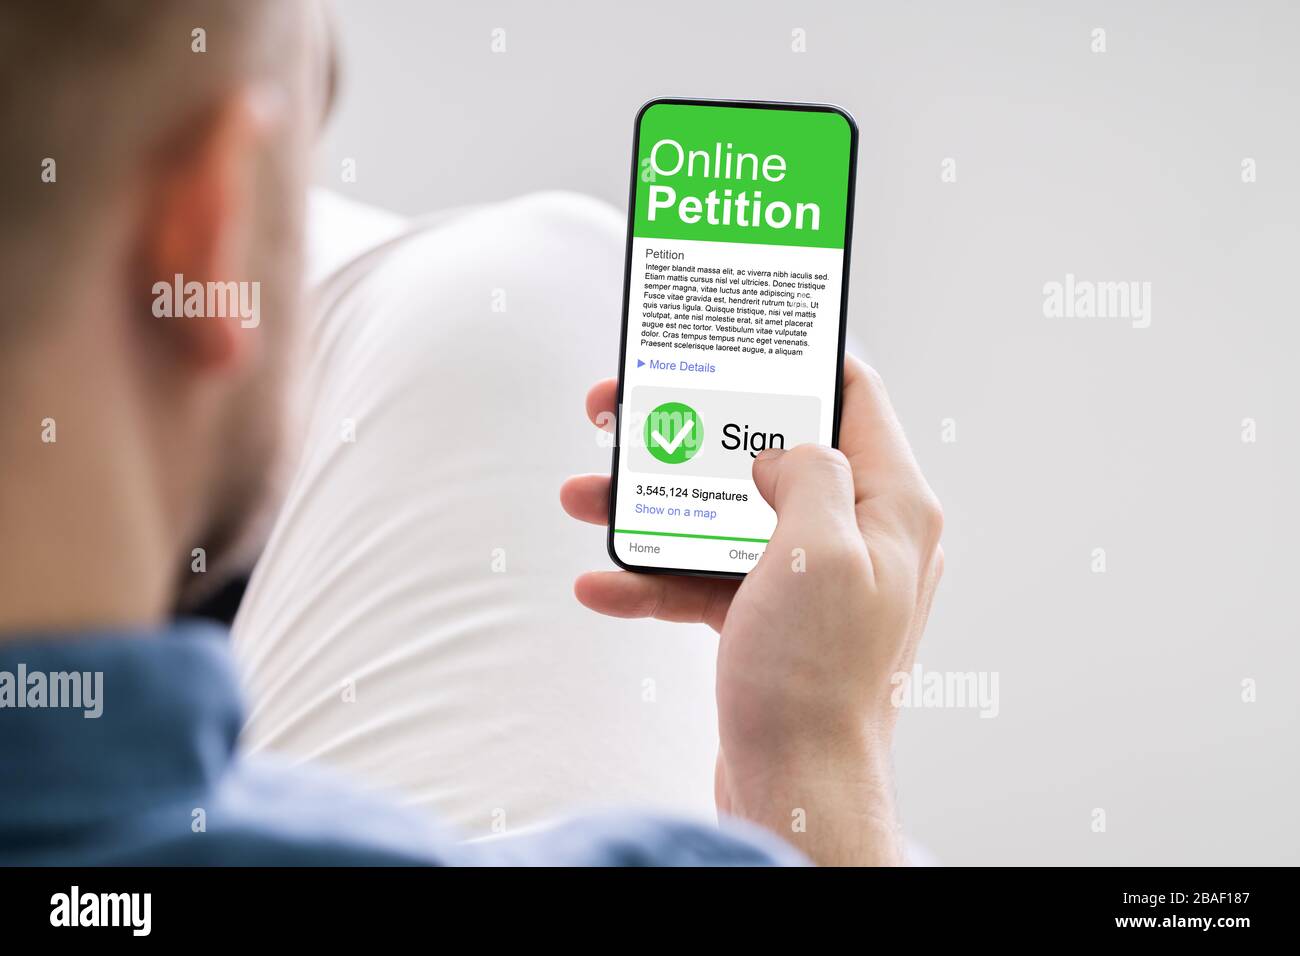 Man Looking At Online Petition Form On Smartphone Stock Photo